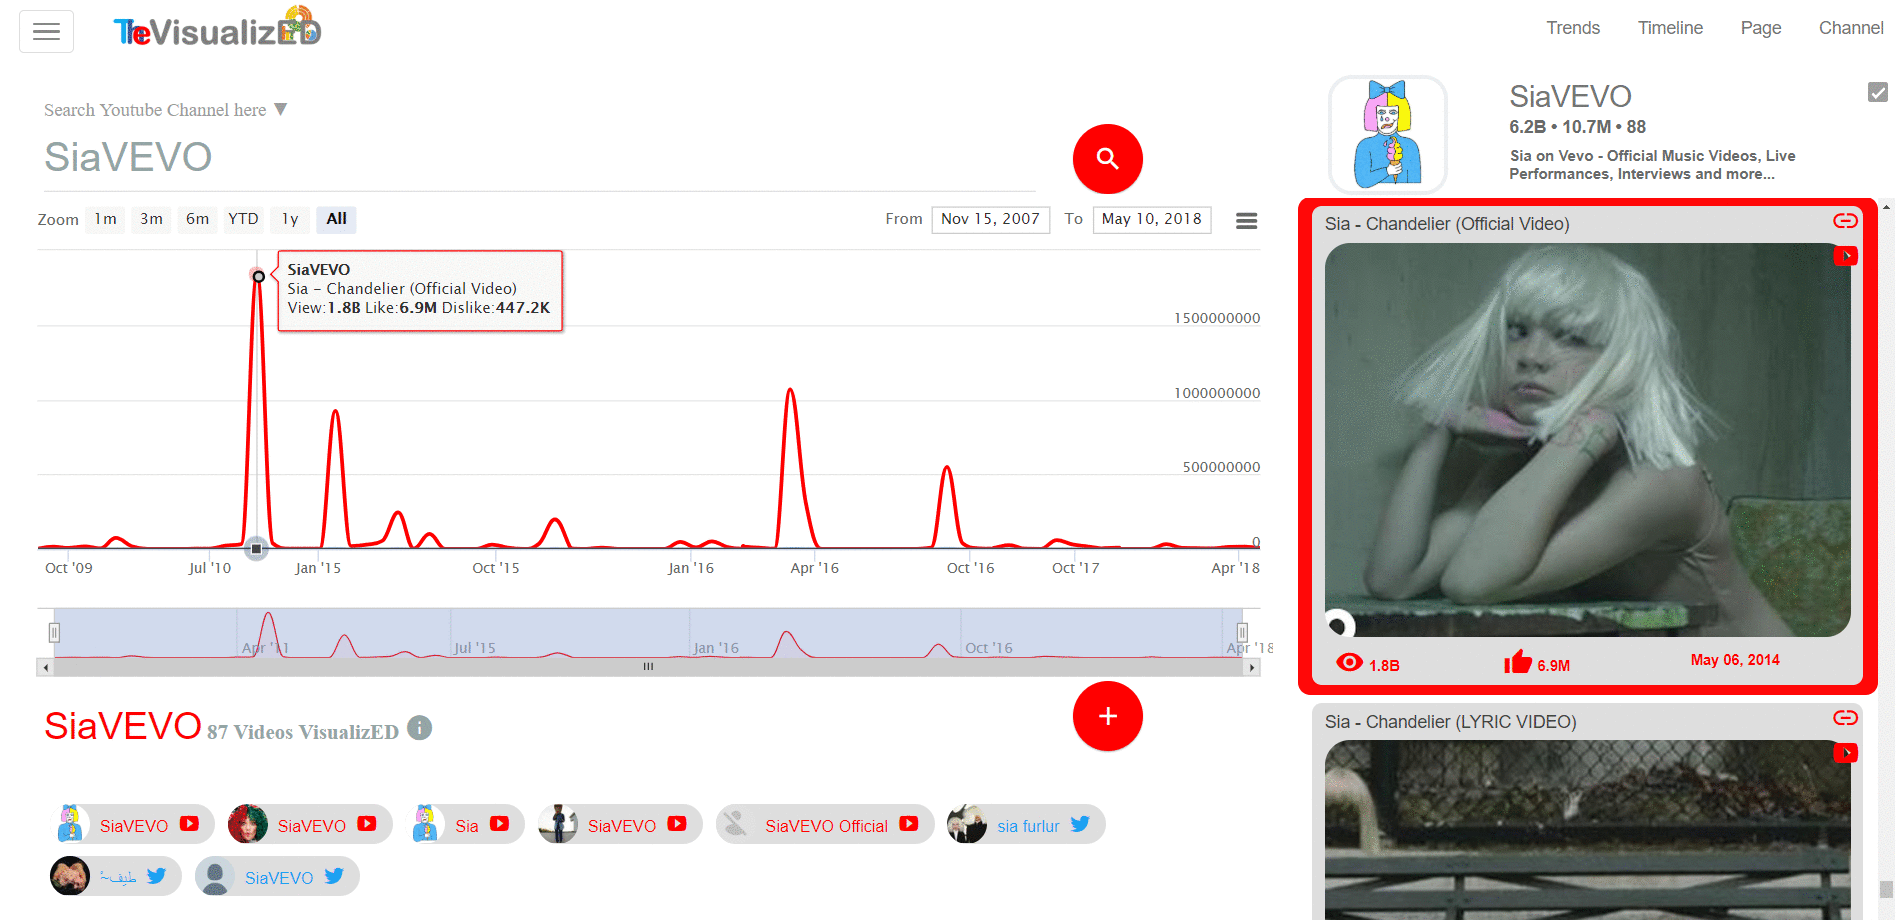 TheVisualized YouTube Channel of Sia VEVO